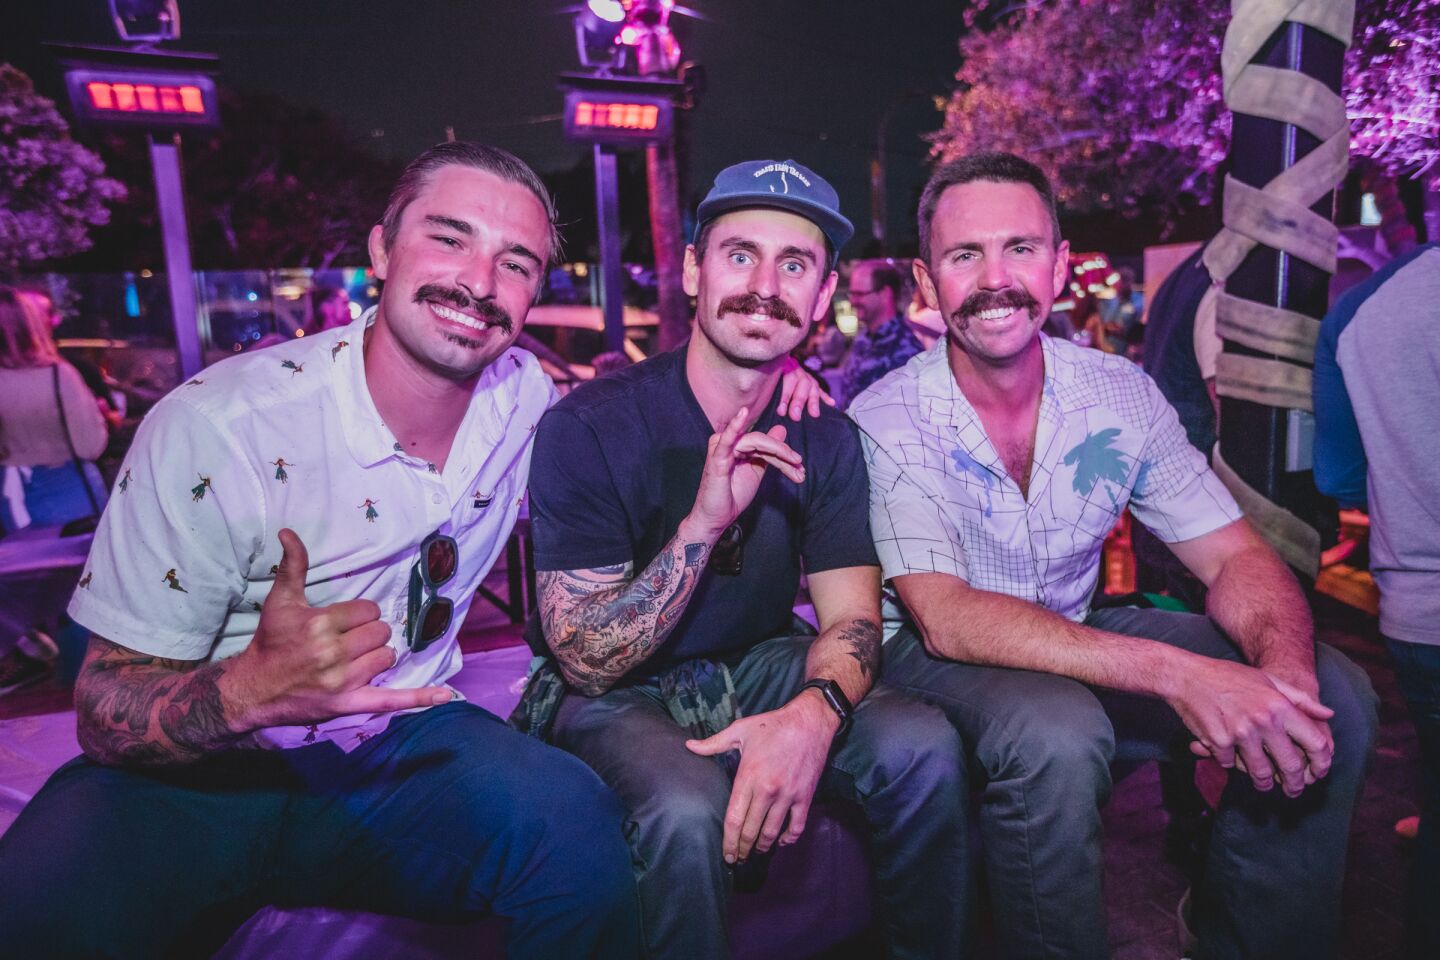 Mustaches were all the rage at the San Diego Fire Department Mustache Bash benefitting FirefighterAid at Mavericks Beach Club in Pacific Beach on Thursday, Nov. 4, 2021.